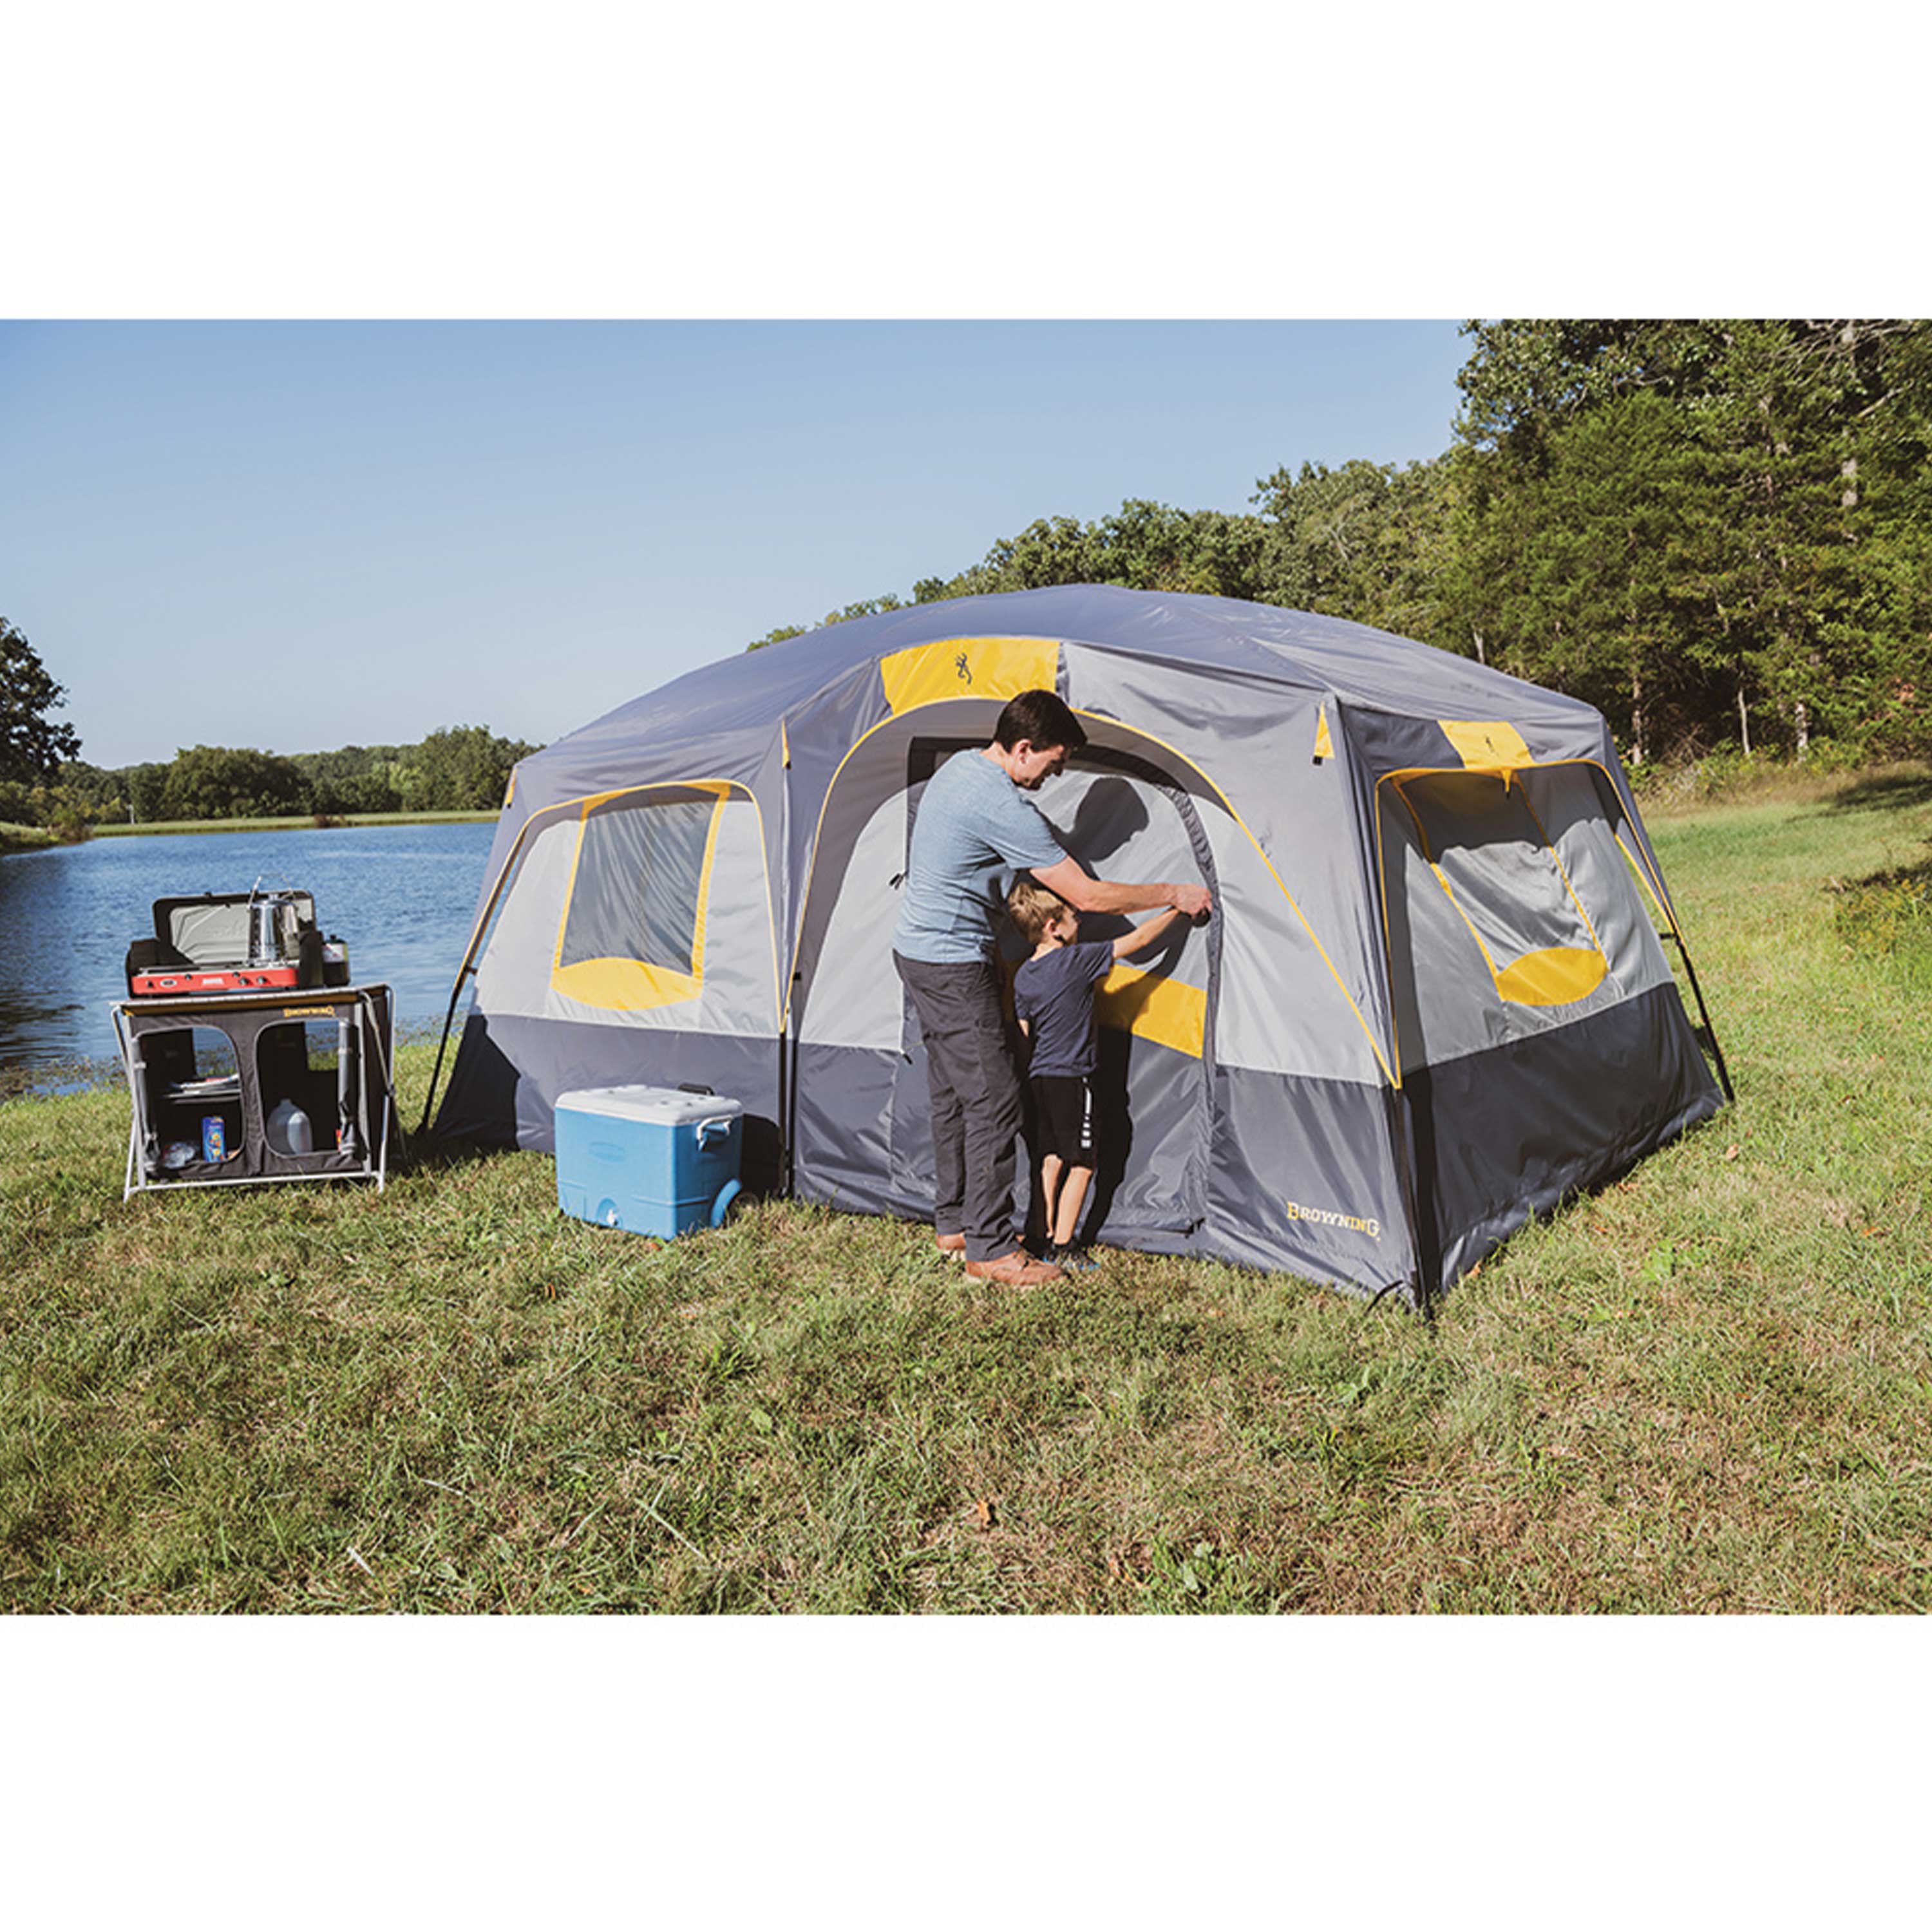 Browning Big Horn Two Room Tent - 2022 Color